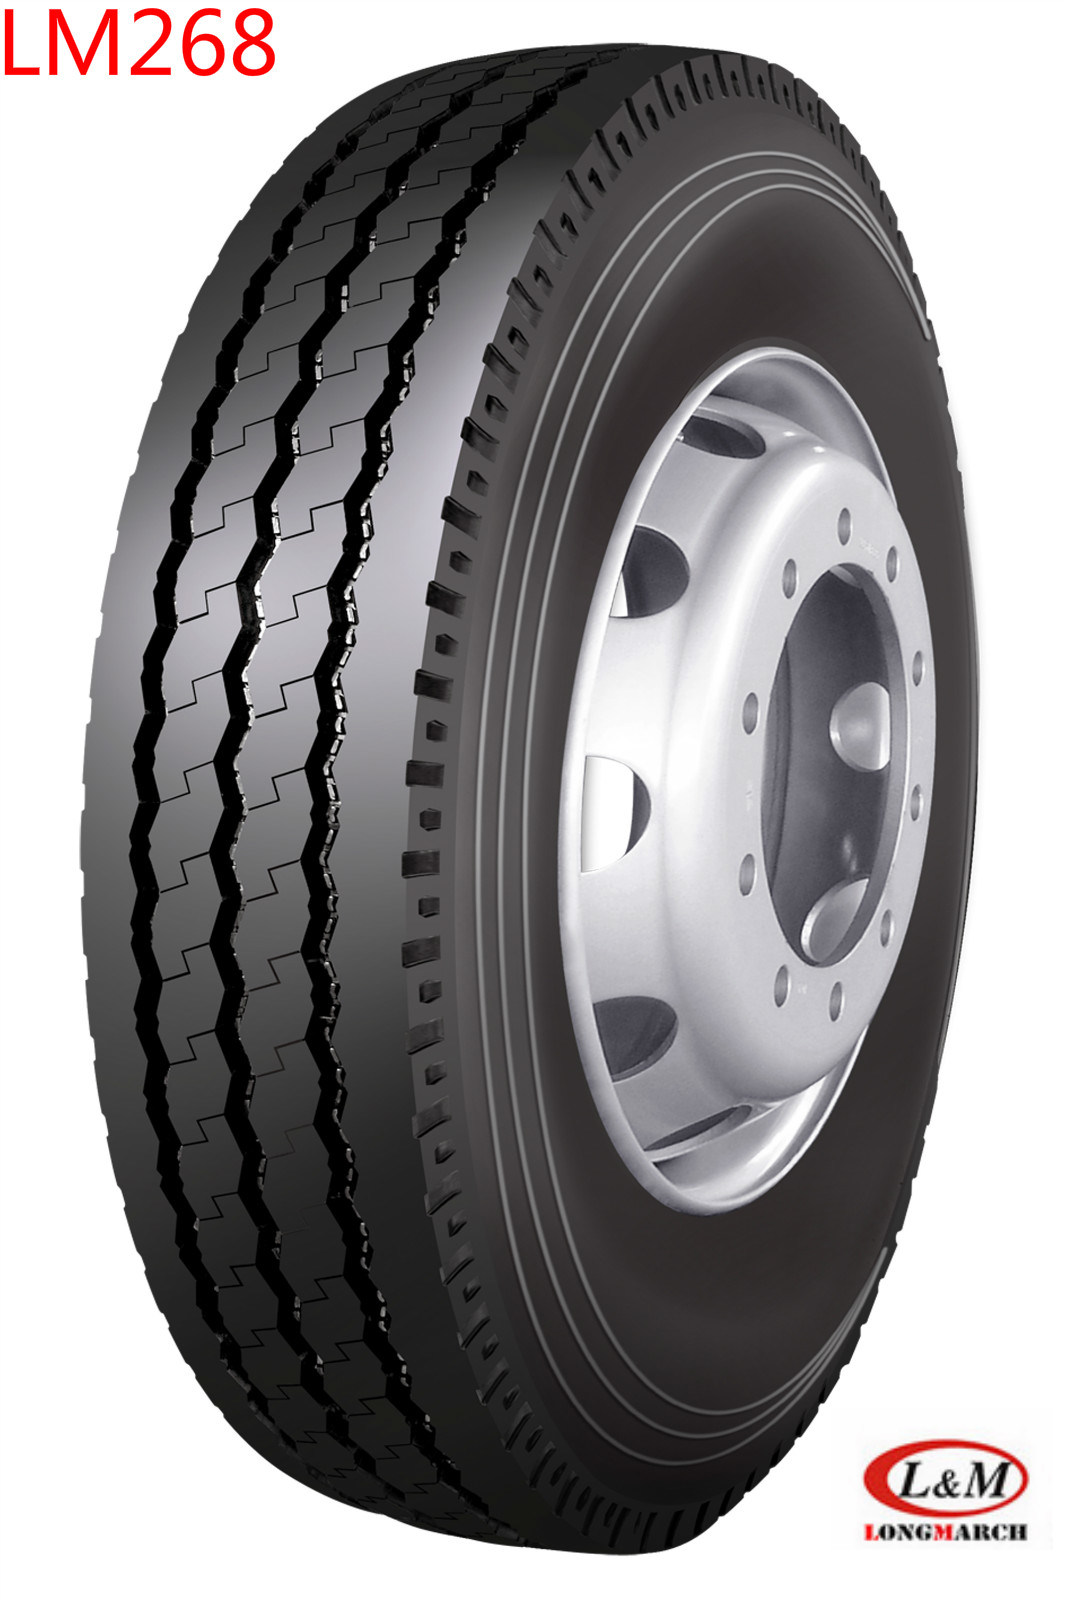 1000R20 Longmarch / Roadlux Radial Truck Tire with BIS (LM268)